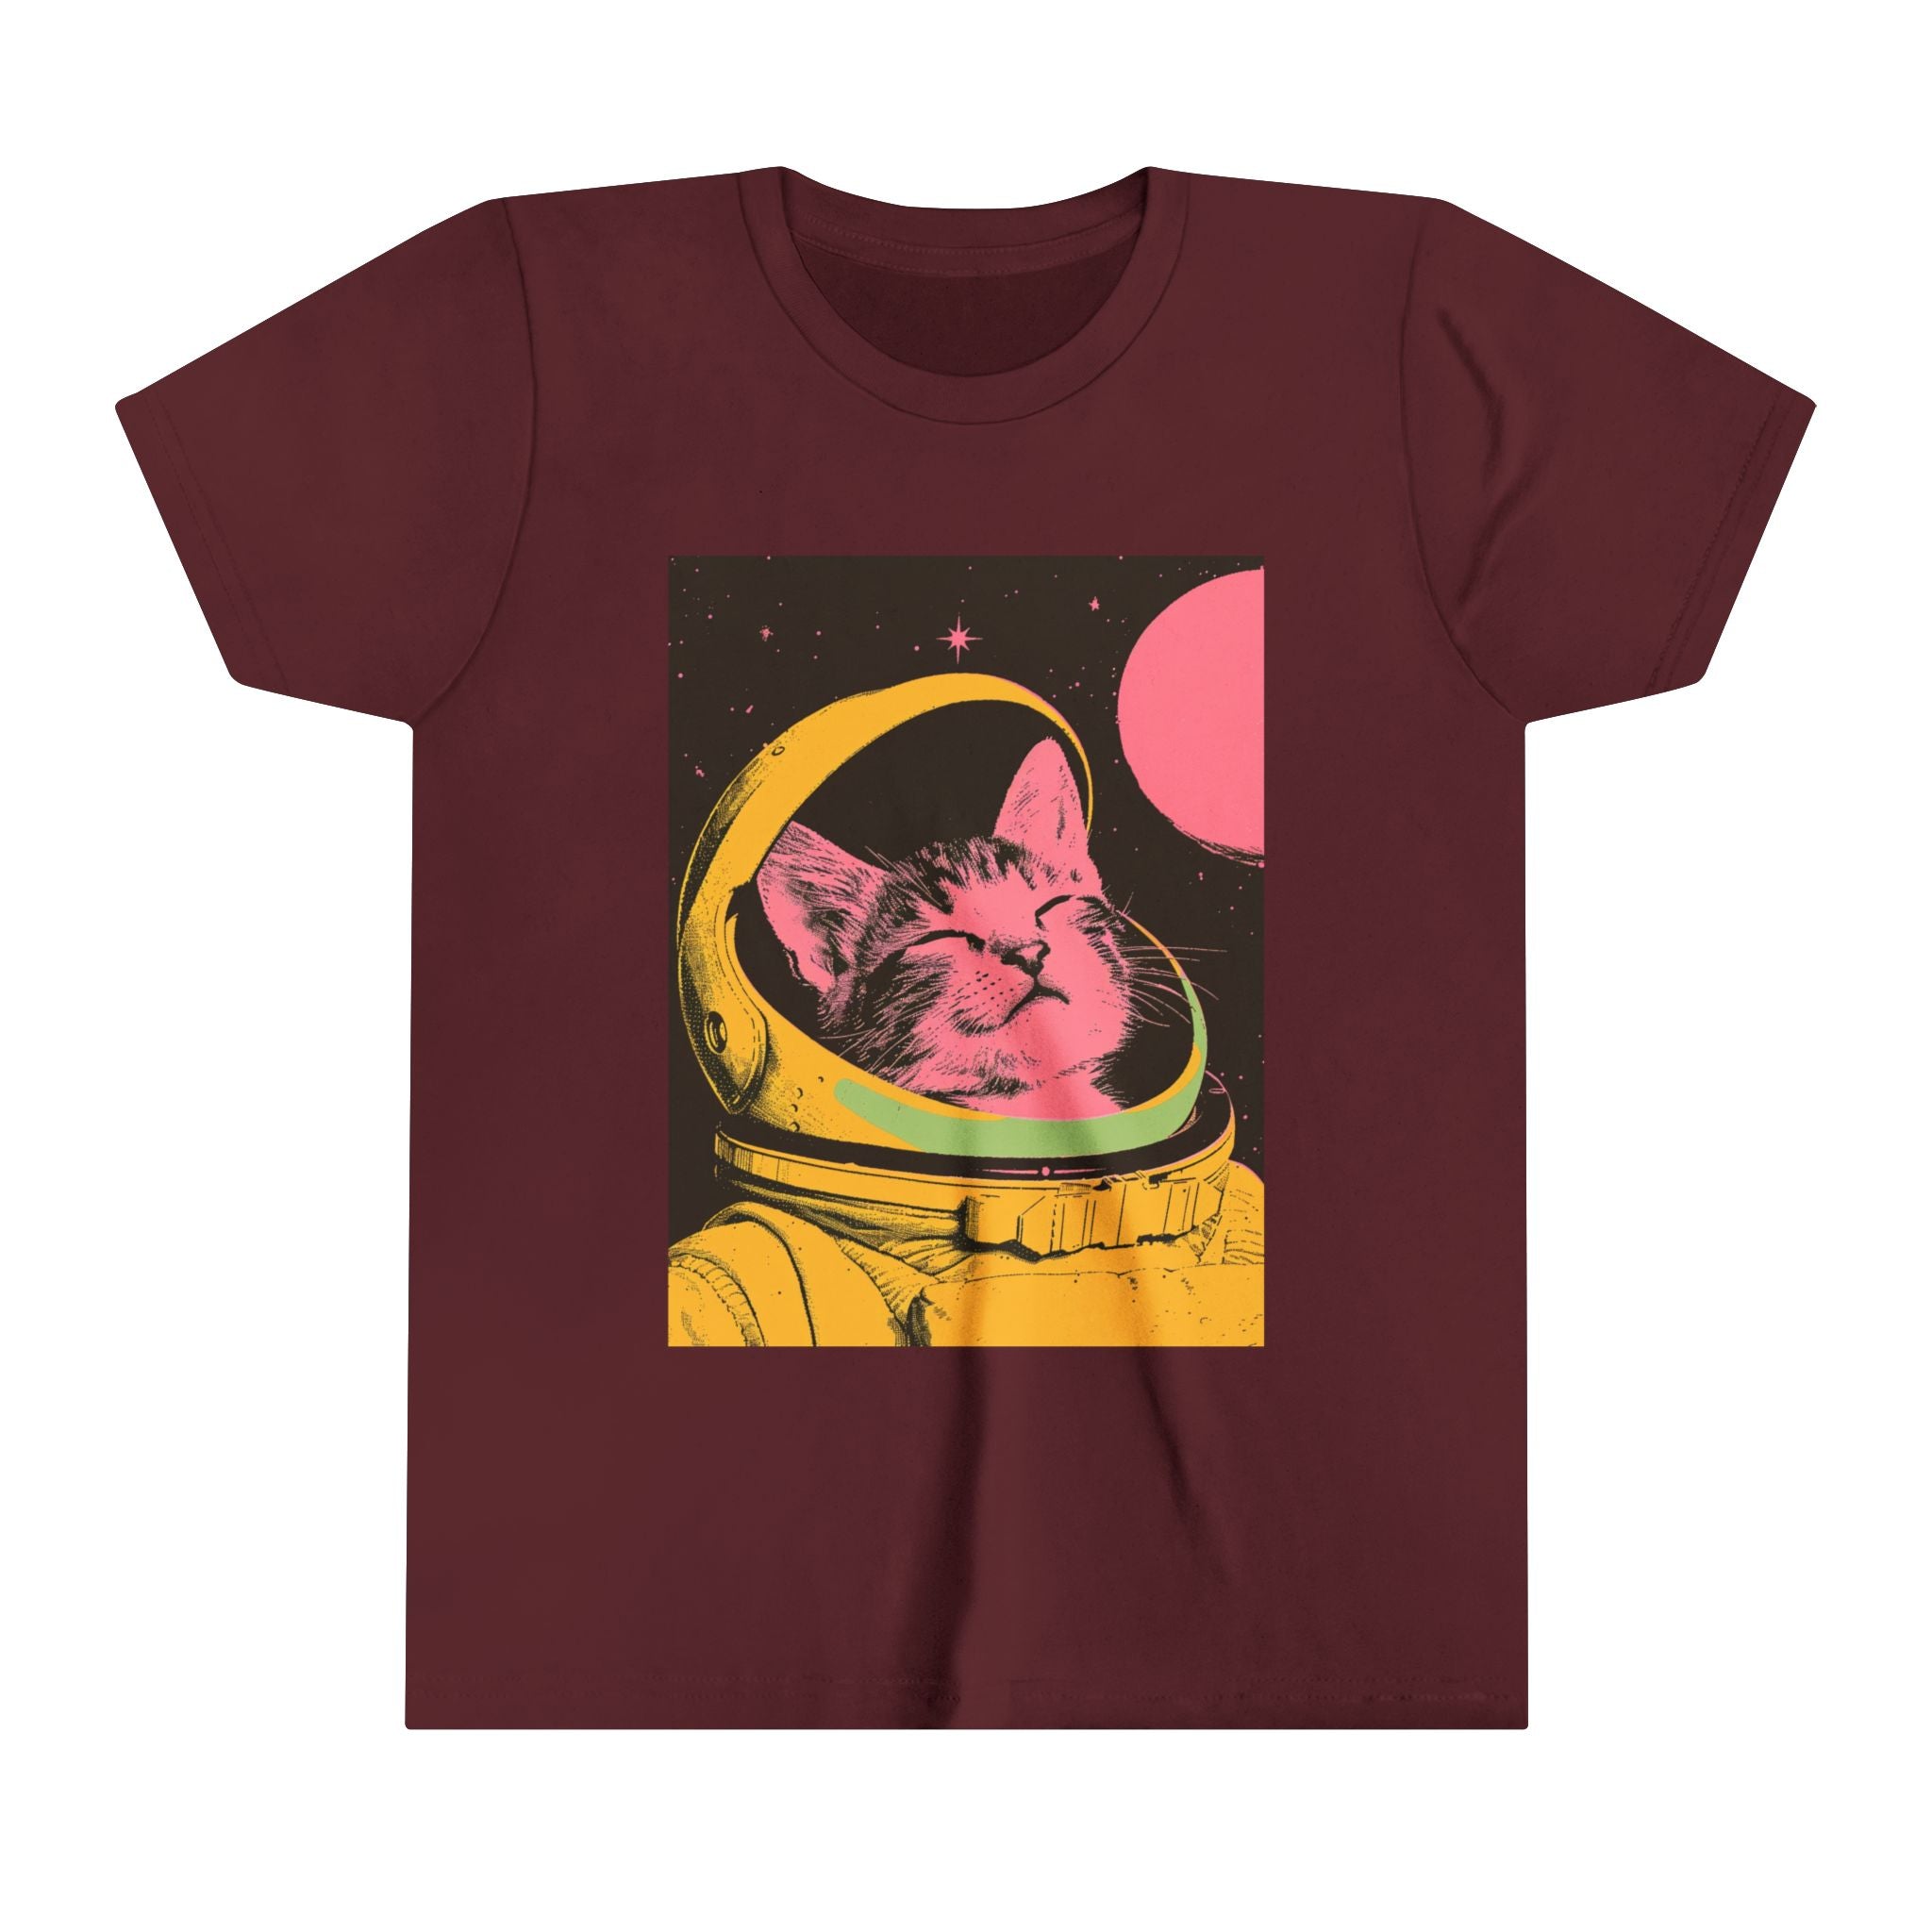 Astronaut cat youth tee, vintage pop art t-shirt, kids space adventure shirt, fun graphic tee for kids, comfortable short sleeve tee, durable youth clothing, playful cat design shirt, imaginative kids apparel, vibrant pop art tee, stylish children's shirt, soft and breathable fabric, high-quality kids tee, space-themed clothing, unique youth t-shirt, cosmic adventure apparel